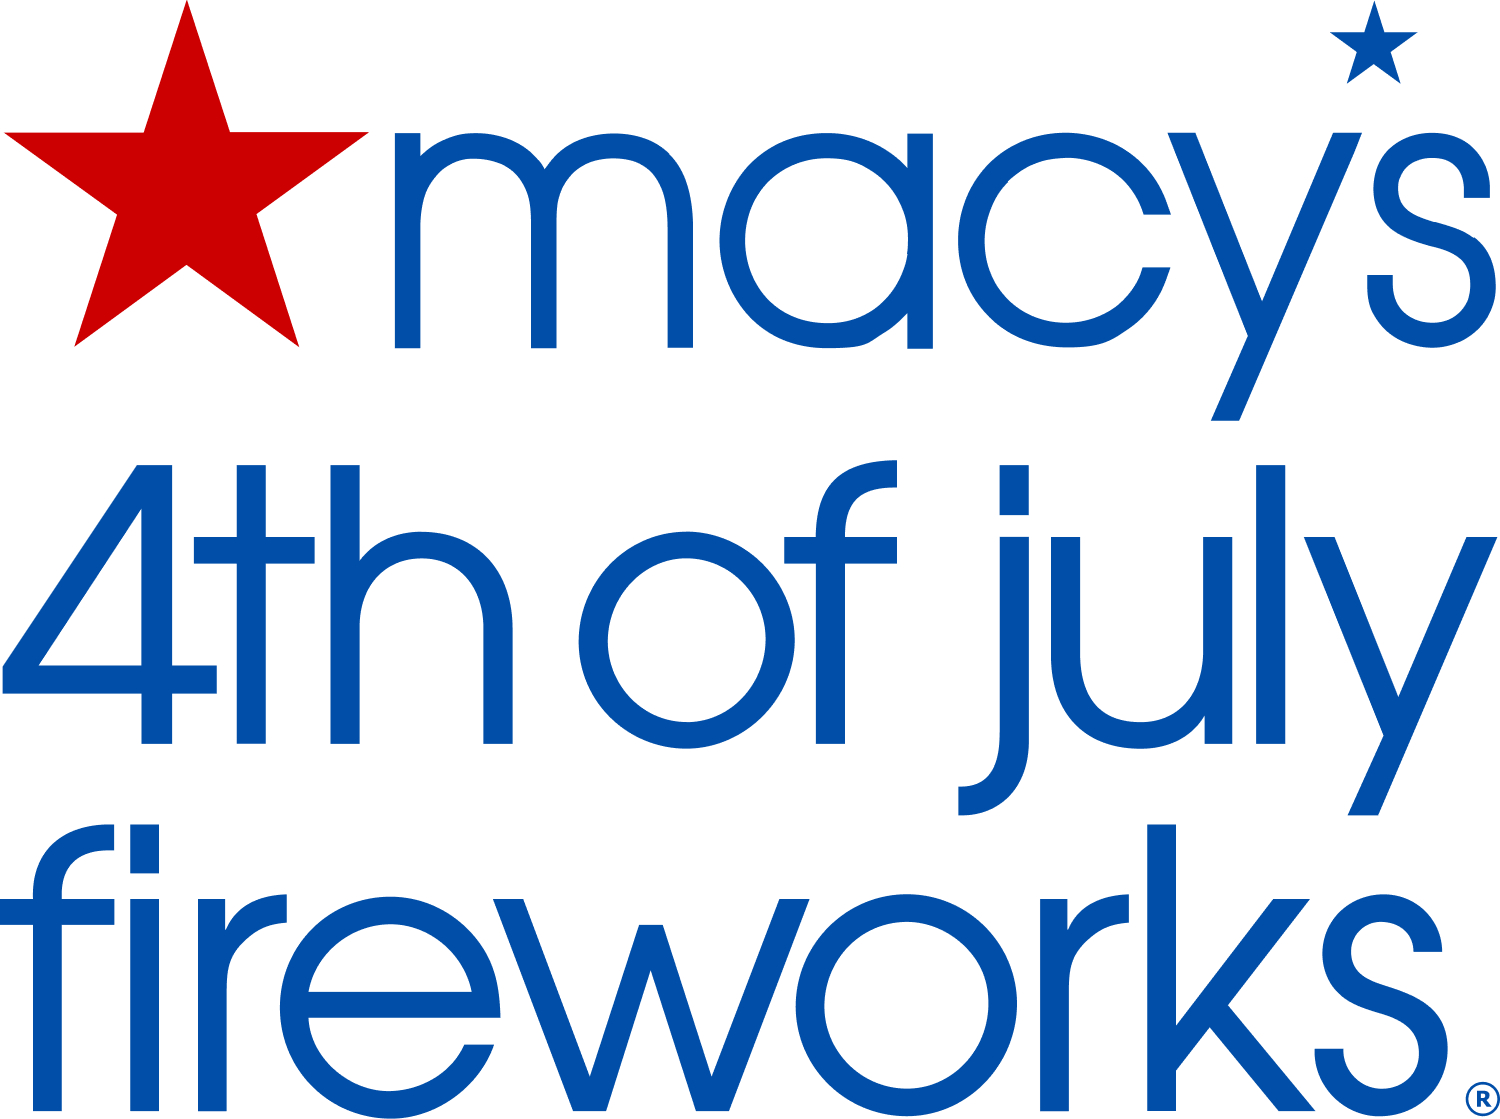 NBC's "Macy's 4th of July Fireworks" to feature performances by Micky Guyton and more